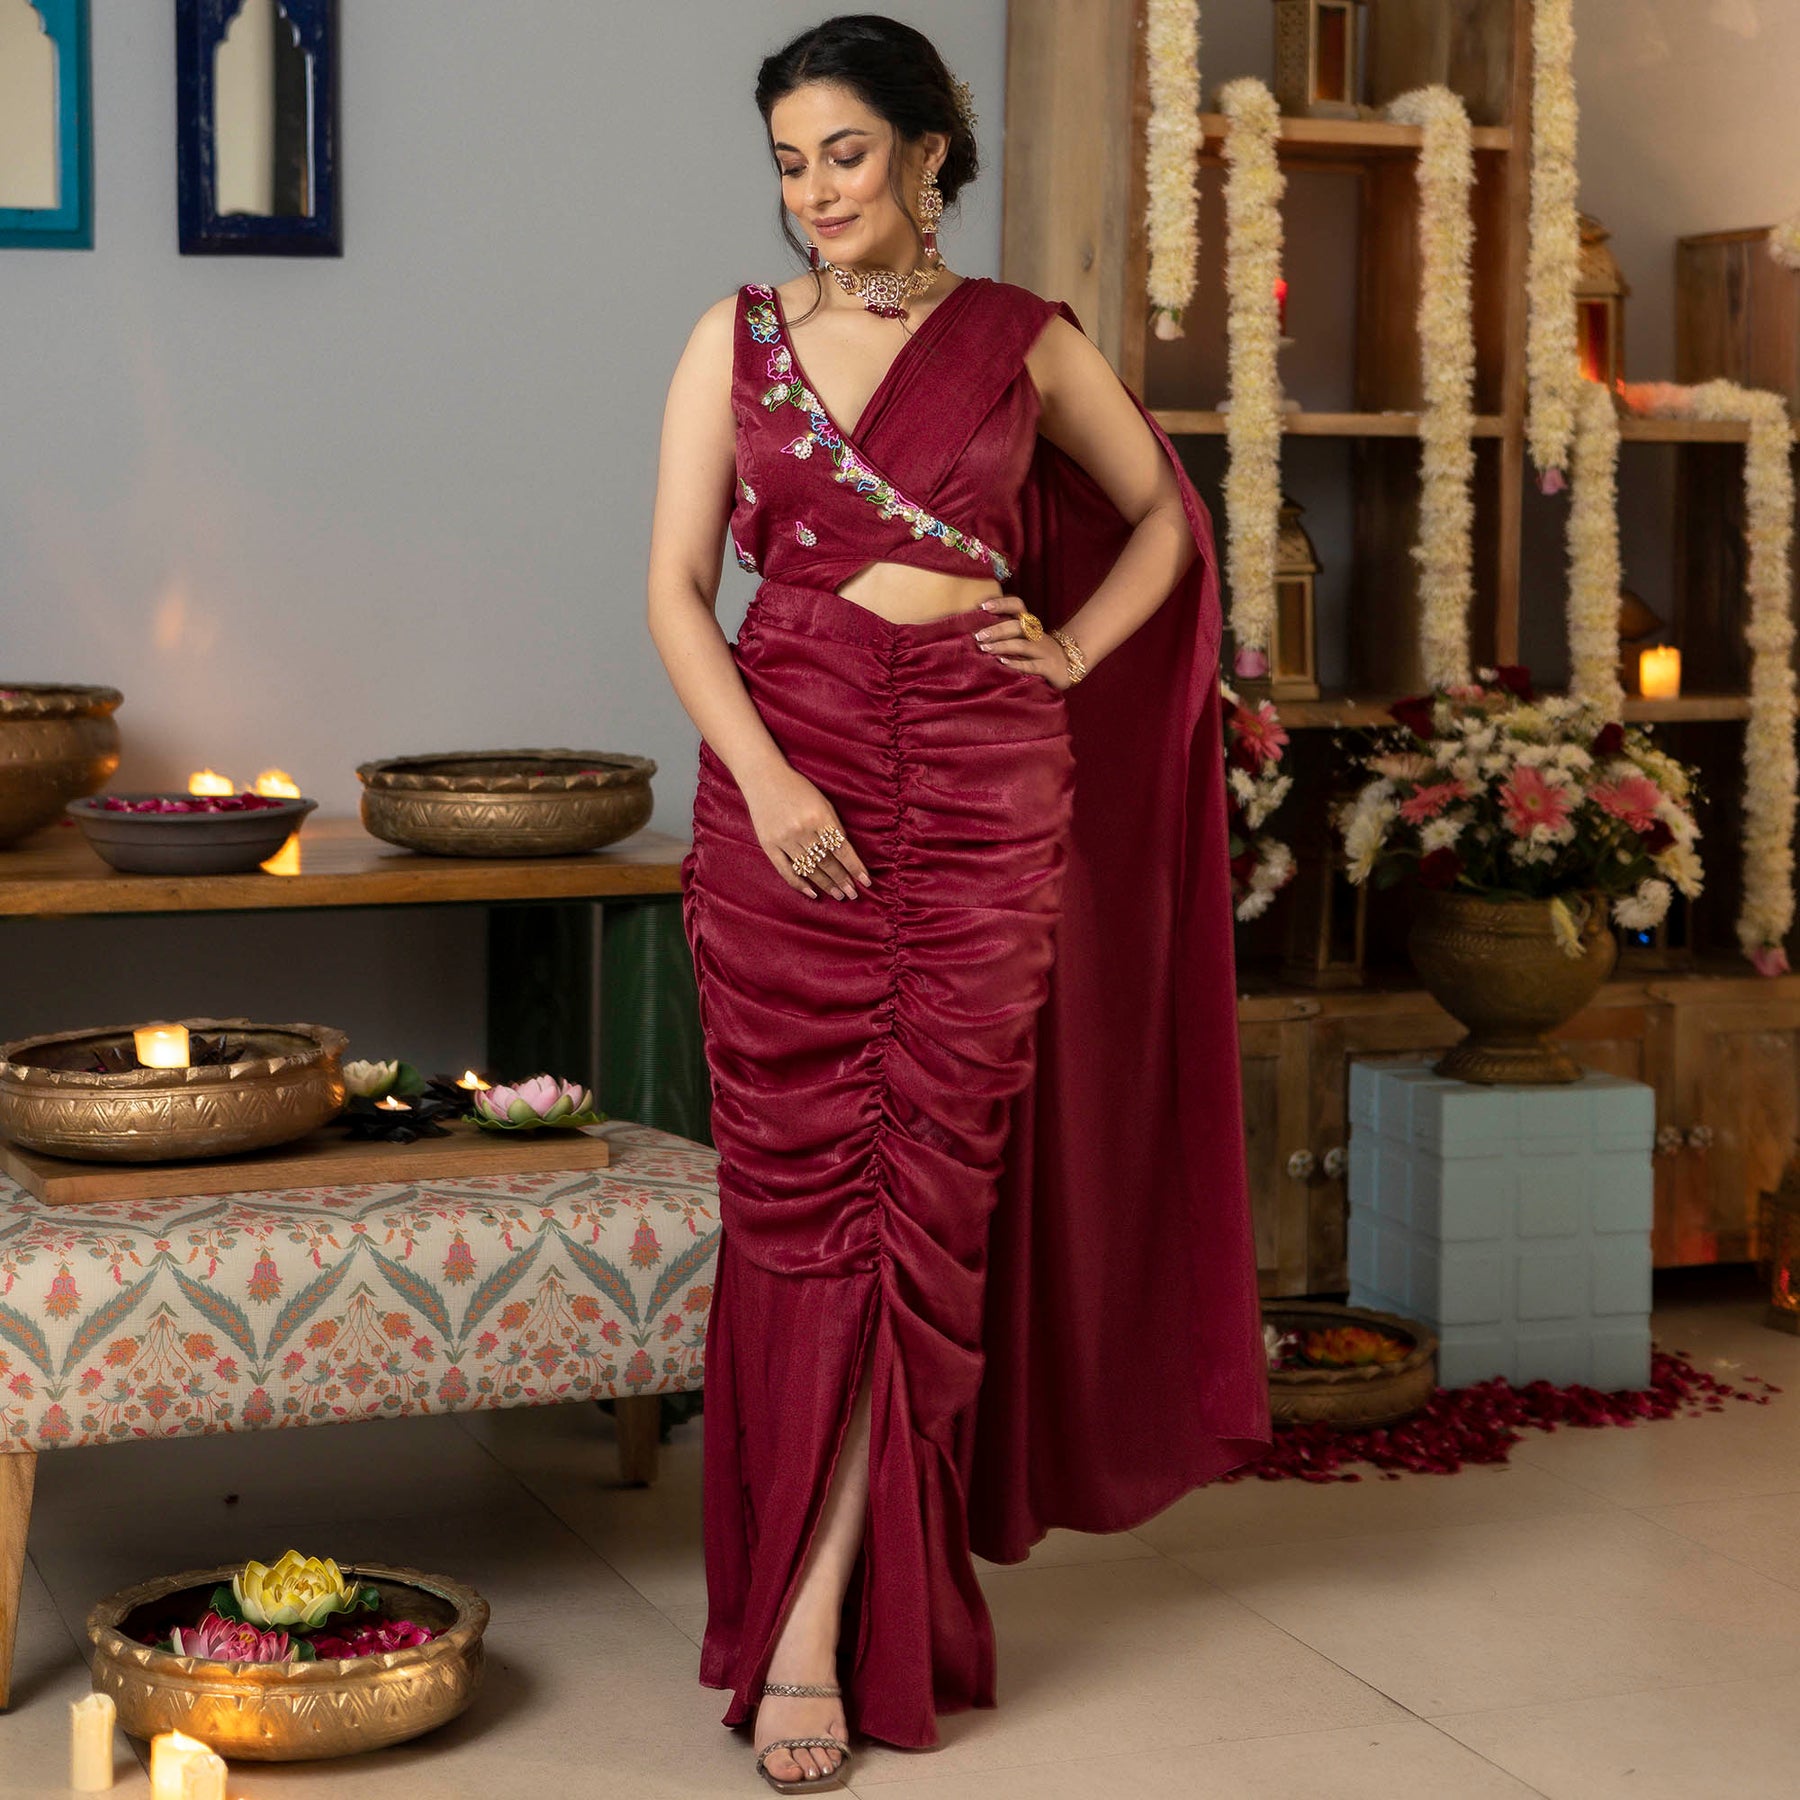 10 red saris for Karva Chauth if you're looking foir unique ideas